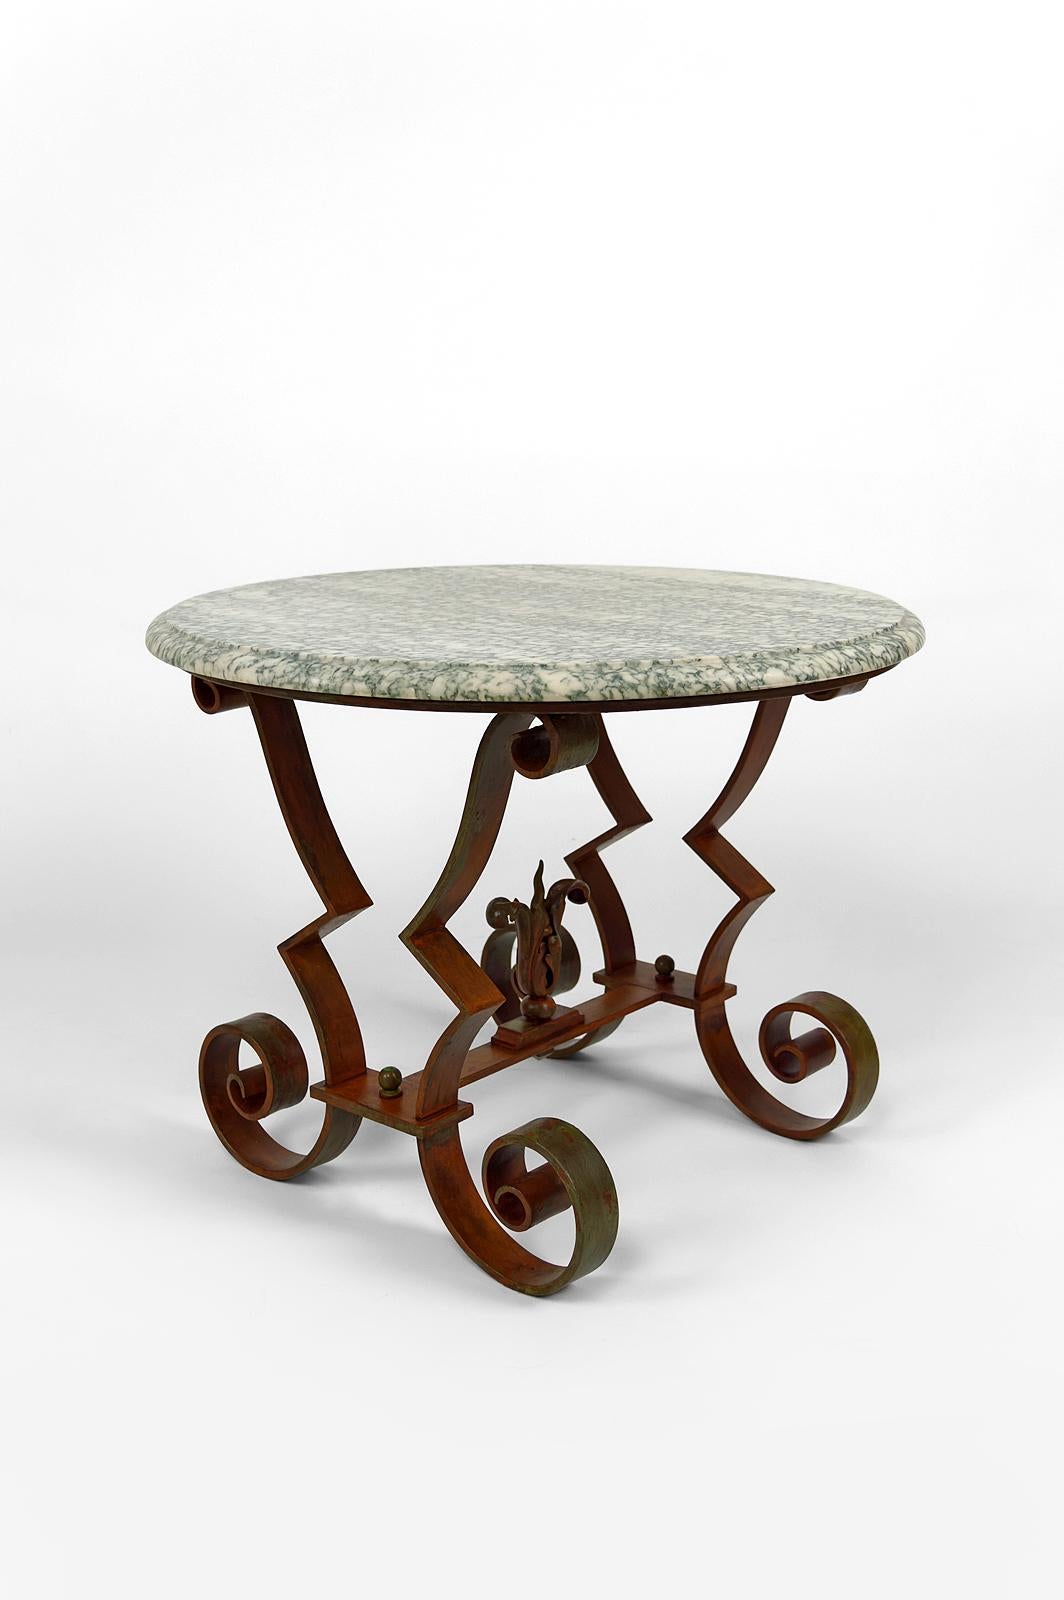 Circular Art Deco Pedestal Table in Marble and Wrought Iron, France, circa 1940 In Good Condition For Sale In VÉZELAY, FR